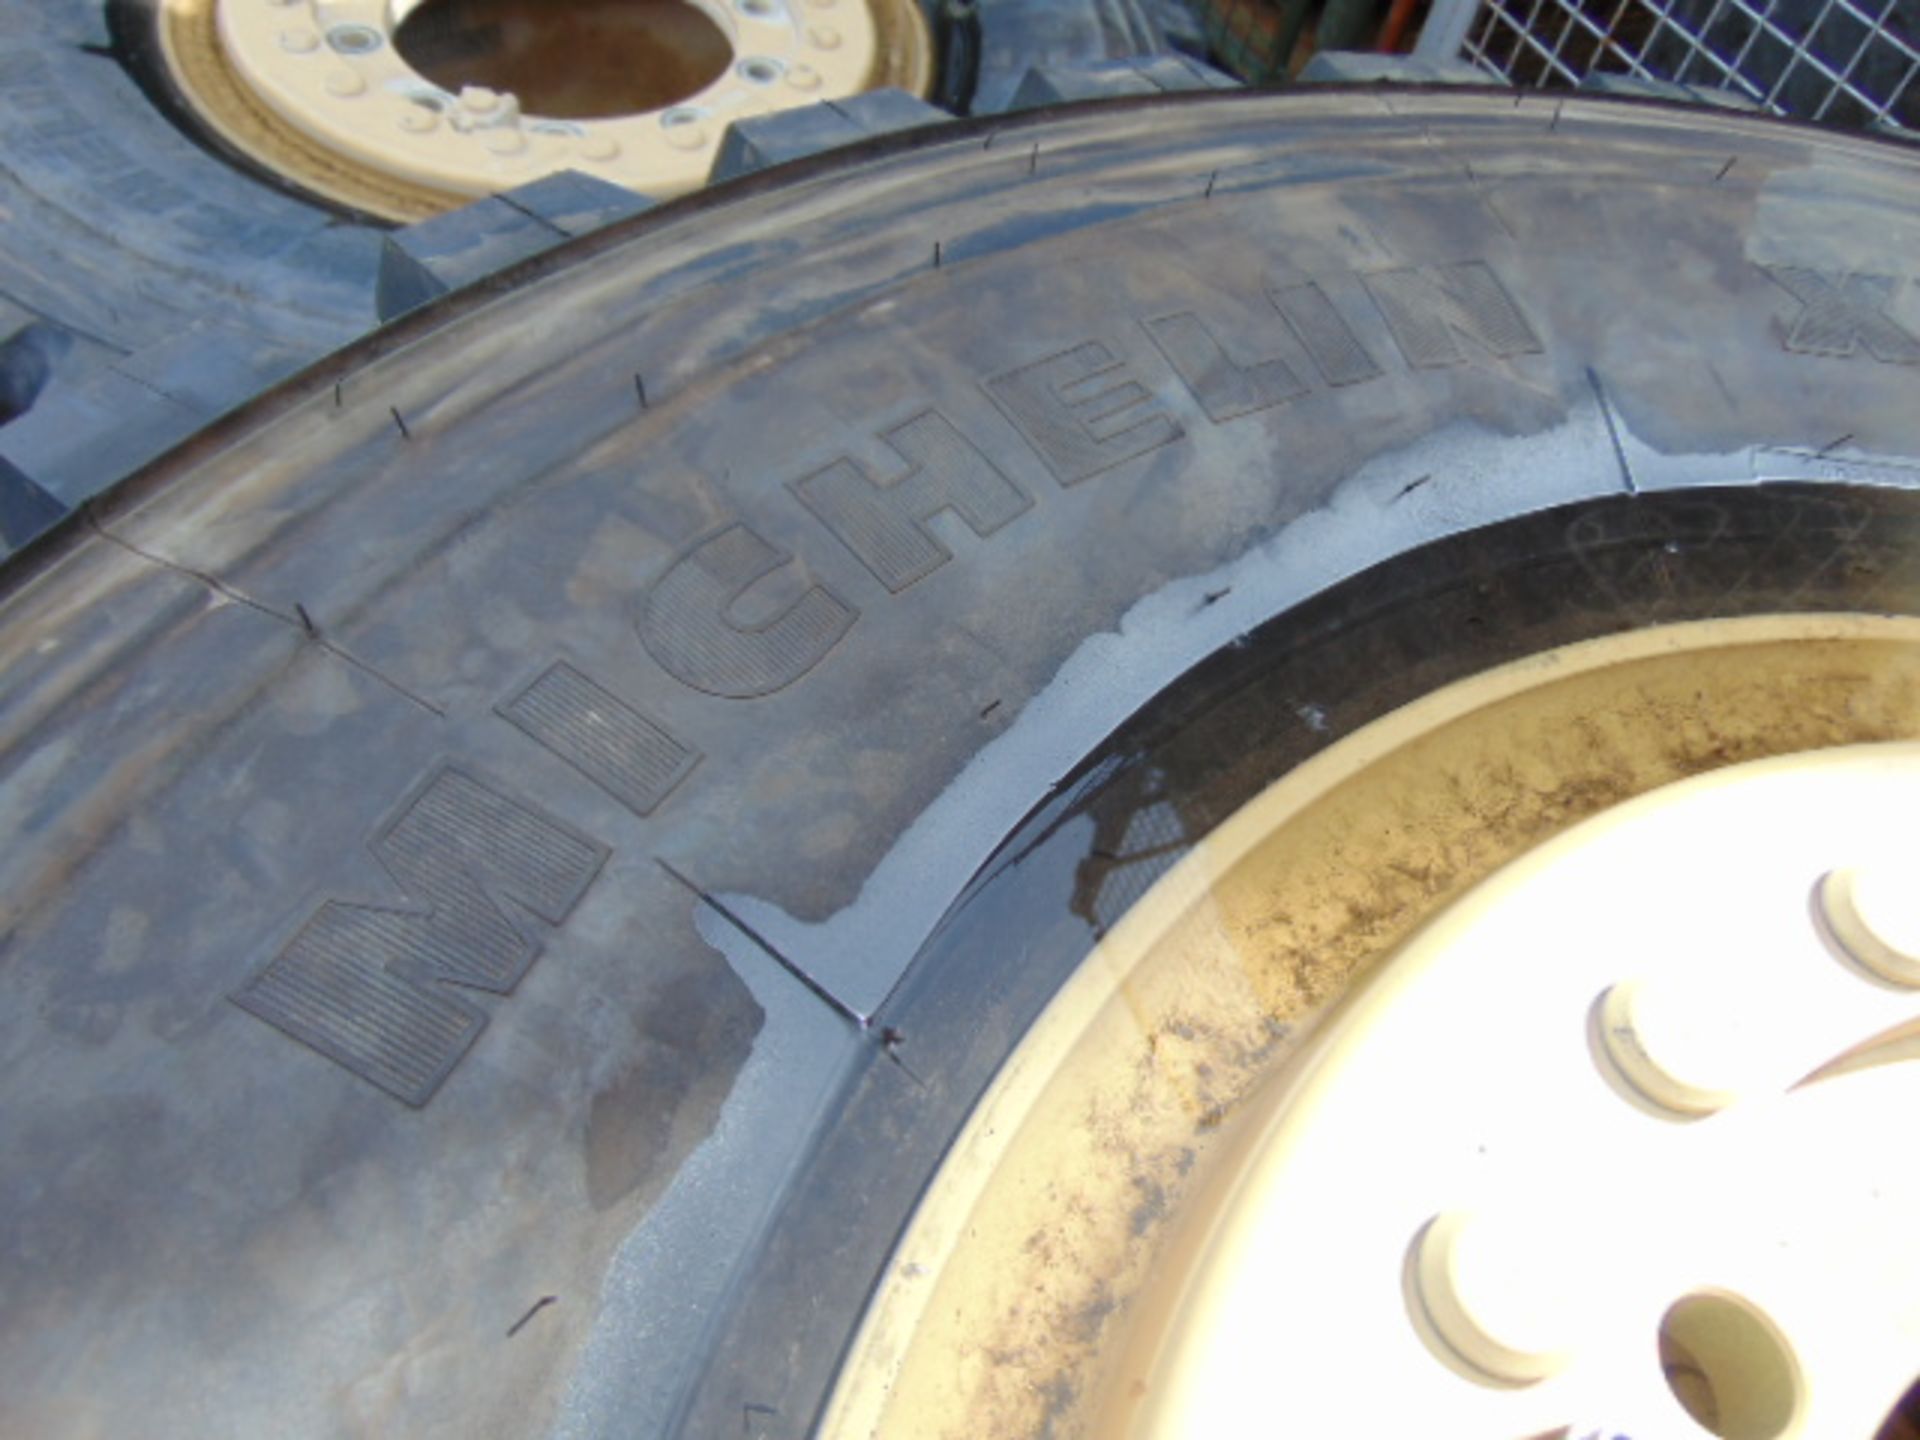 2 x Michelin 395/85 R20 XZL Tyres on 10 Stud Rims - Image 5 of 6